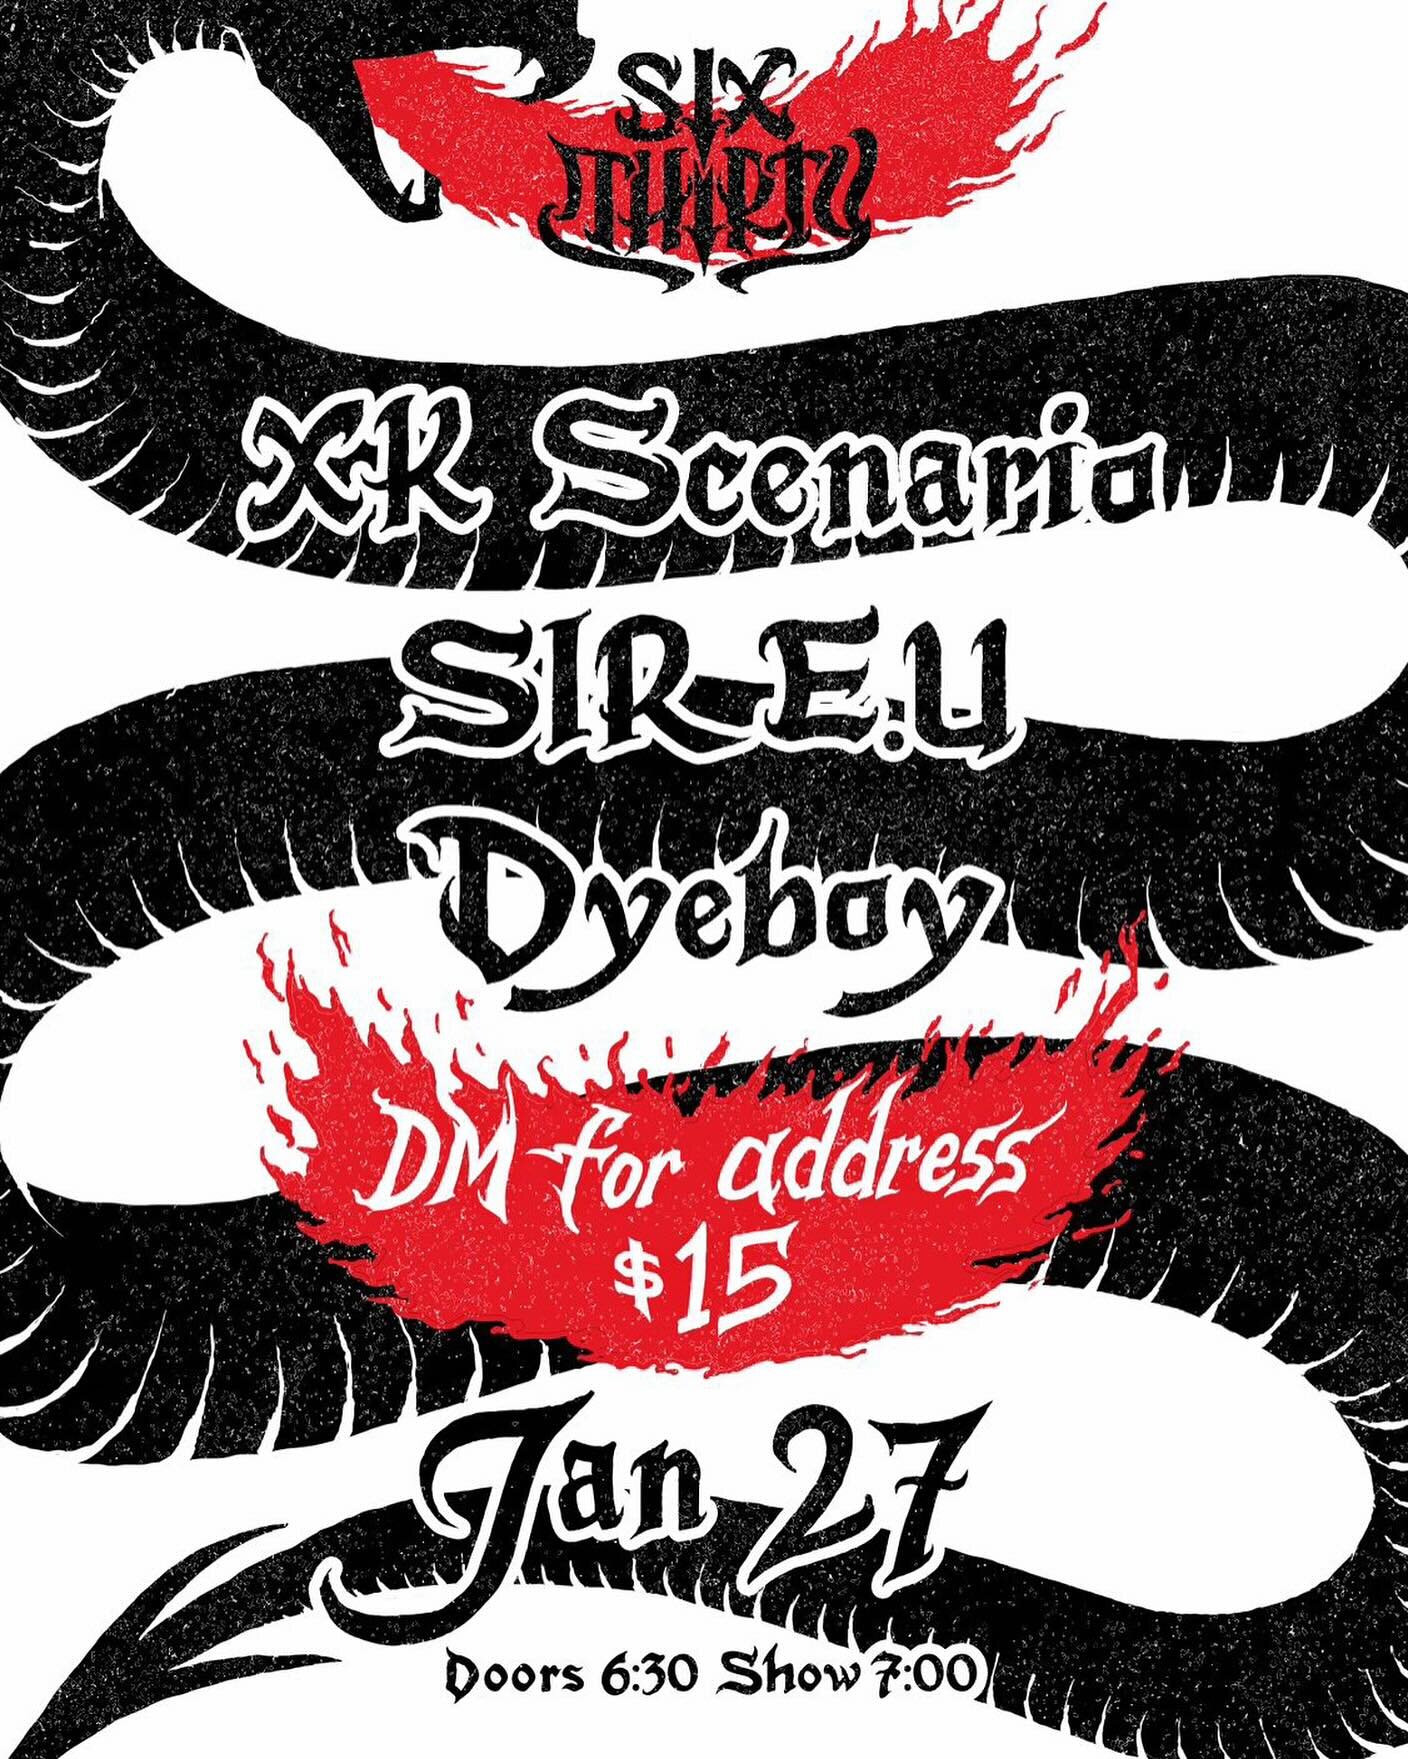 In 2 weeks we play 6:30 club with @sire.u and @_dyeboy.  We&rsquo;ll be playing some shit we haven&rsquo;t played in a long time. Experience greatness. Be there.

#dcpunk #livemusic #progrock